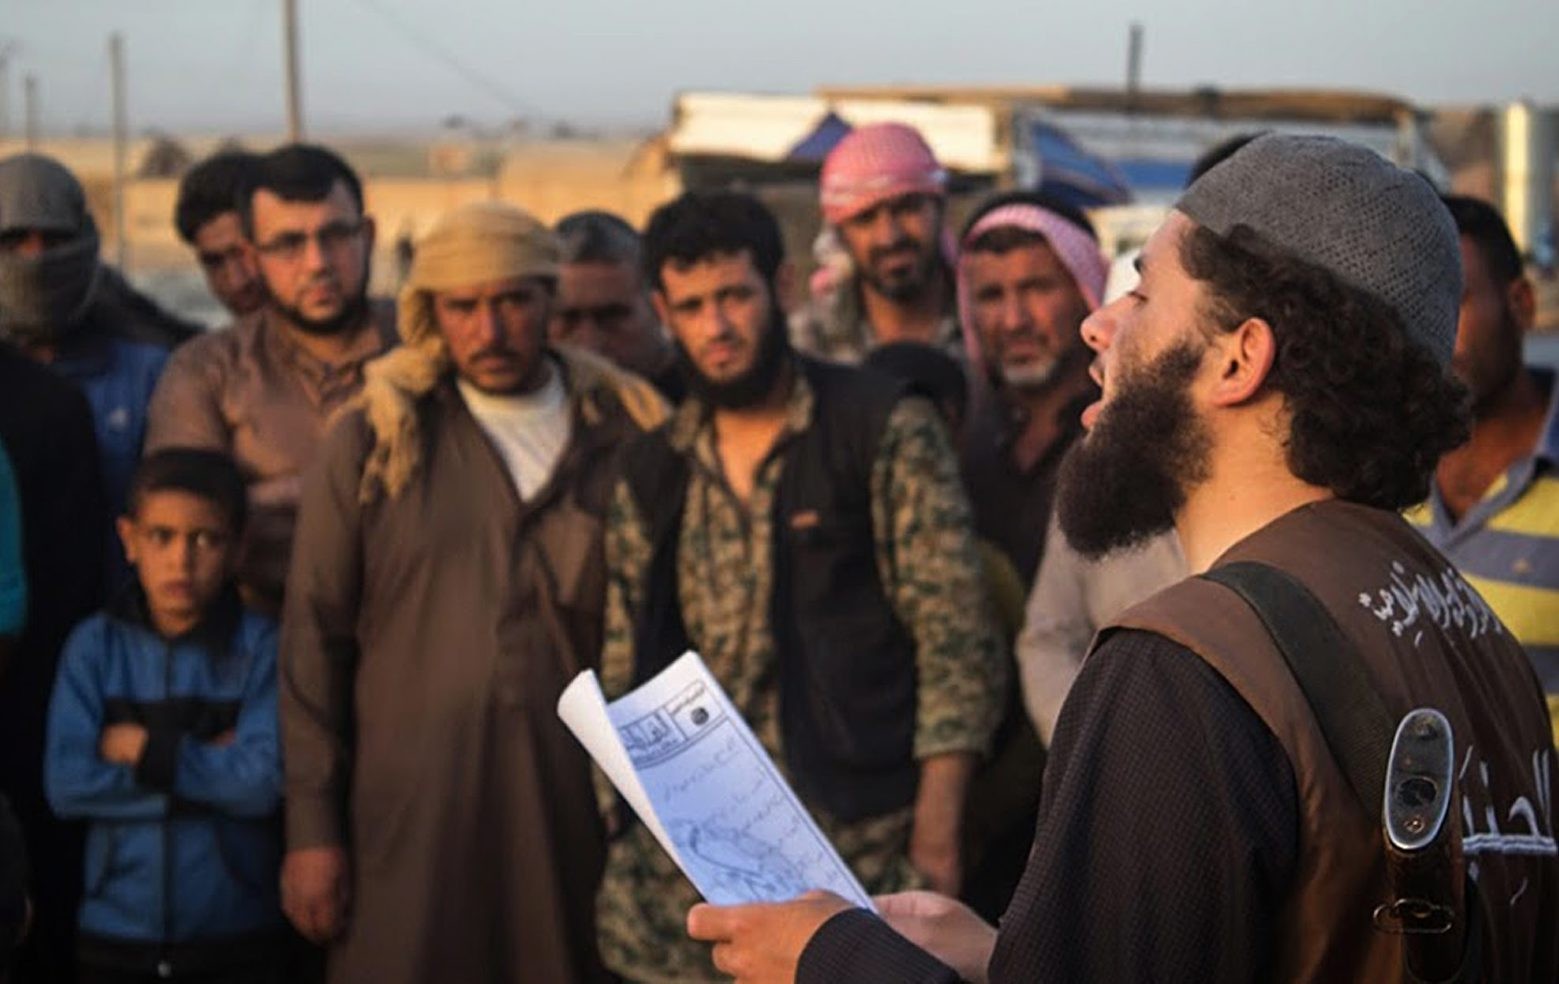 In this photo released on May 14, 2015 by a militant website, which has been verified and is consistent with other AP reporting, a member of the Islamic State group's vice police known as "Hisba," right, reads a verdict handed down by an Islamic court sentencing many they accused of adultery to lashing, in Raqqa City, Syria. (Militant website via AP) Inside The Caliphate Nation Of Fear